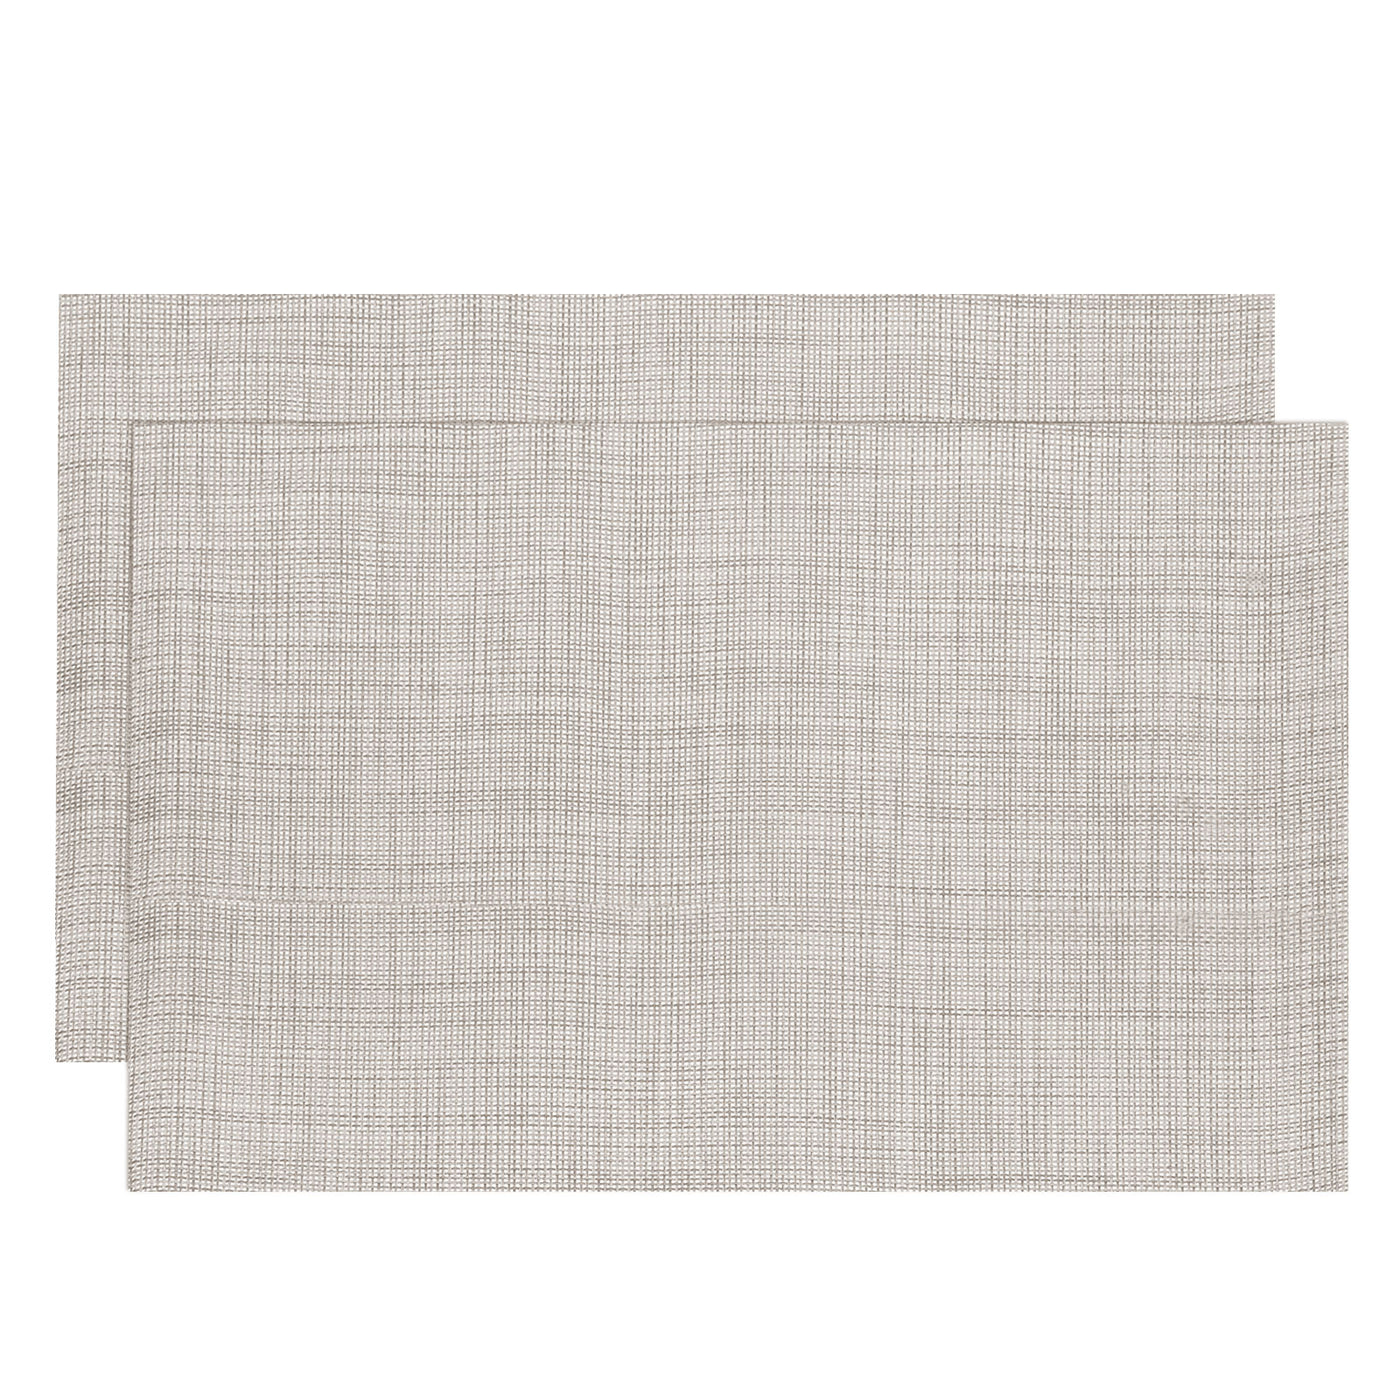 uxcell Uxcell Place Mats, 450x300mm Table Mats Set of 2 PVC Washable Woven Placemat Beige